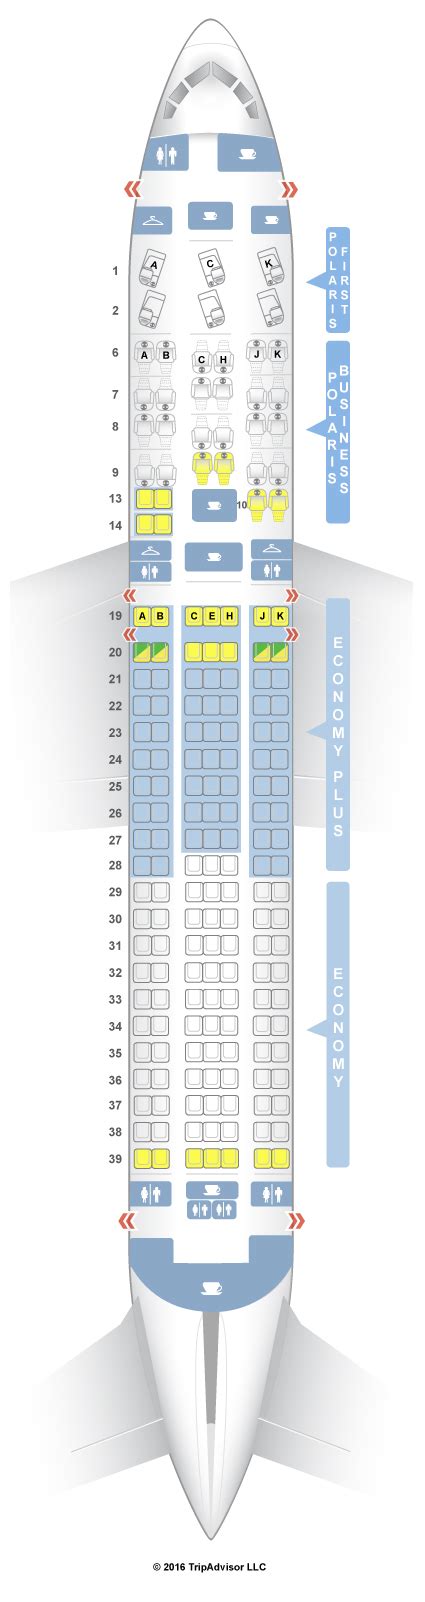 boeing 767 jet seating chart united